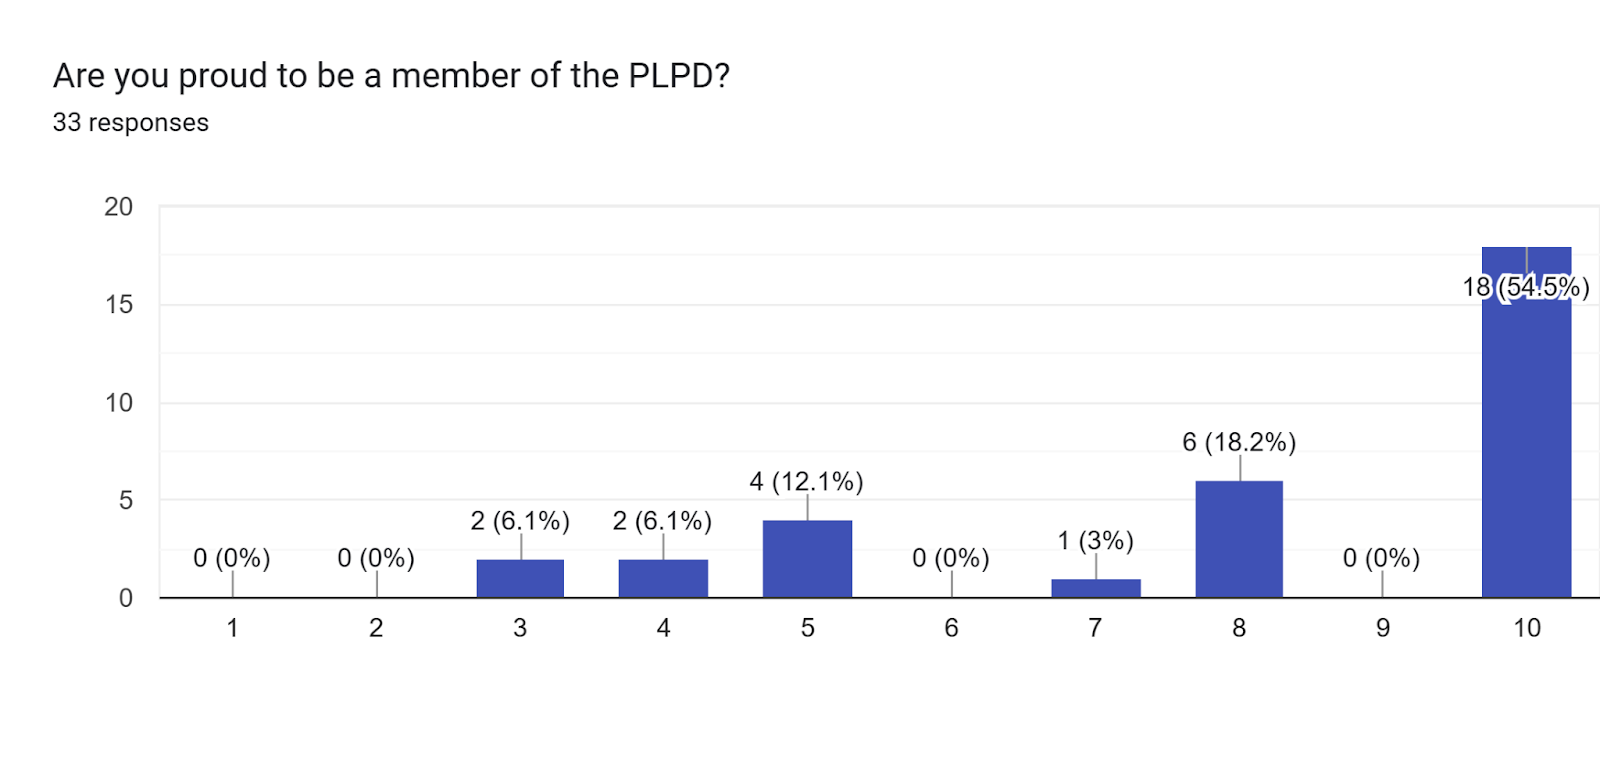 Forms response chart. Question title: Are you proud to be a member of the PLPD?. Number of responses: 33 responses.